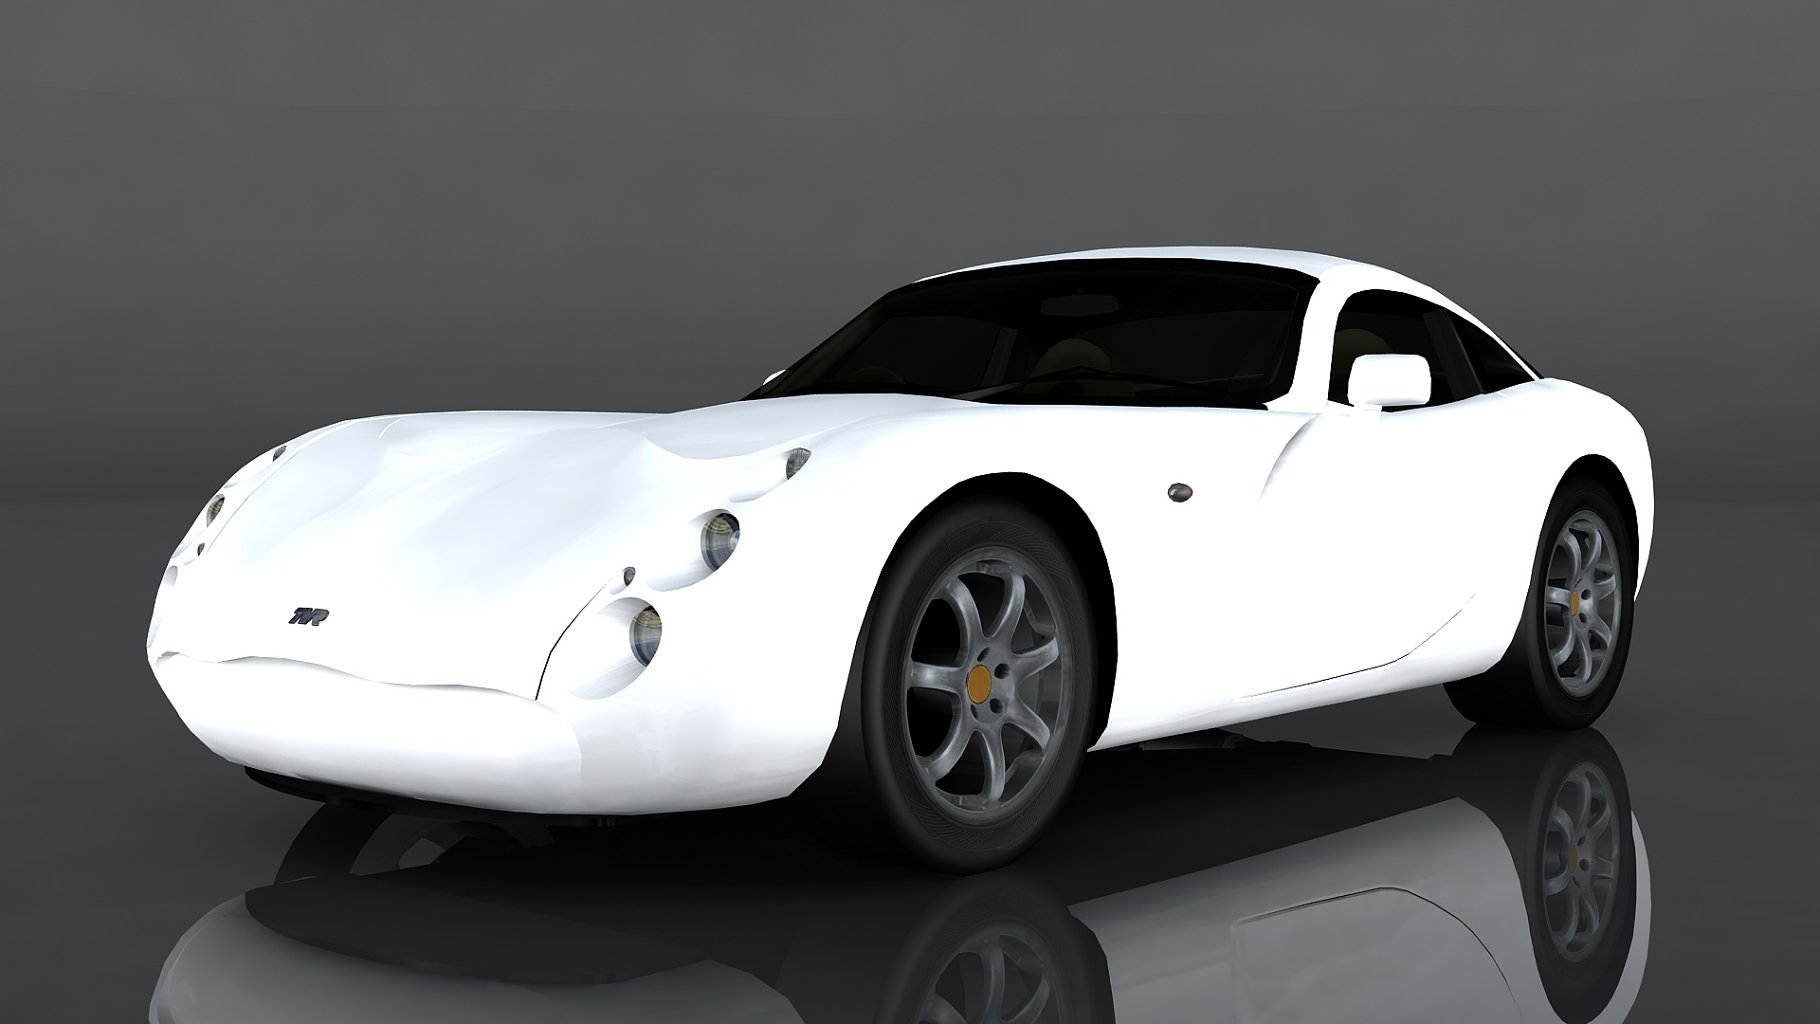 2001 tvr tuscan s mockup in the right side.